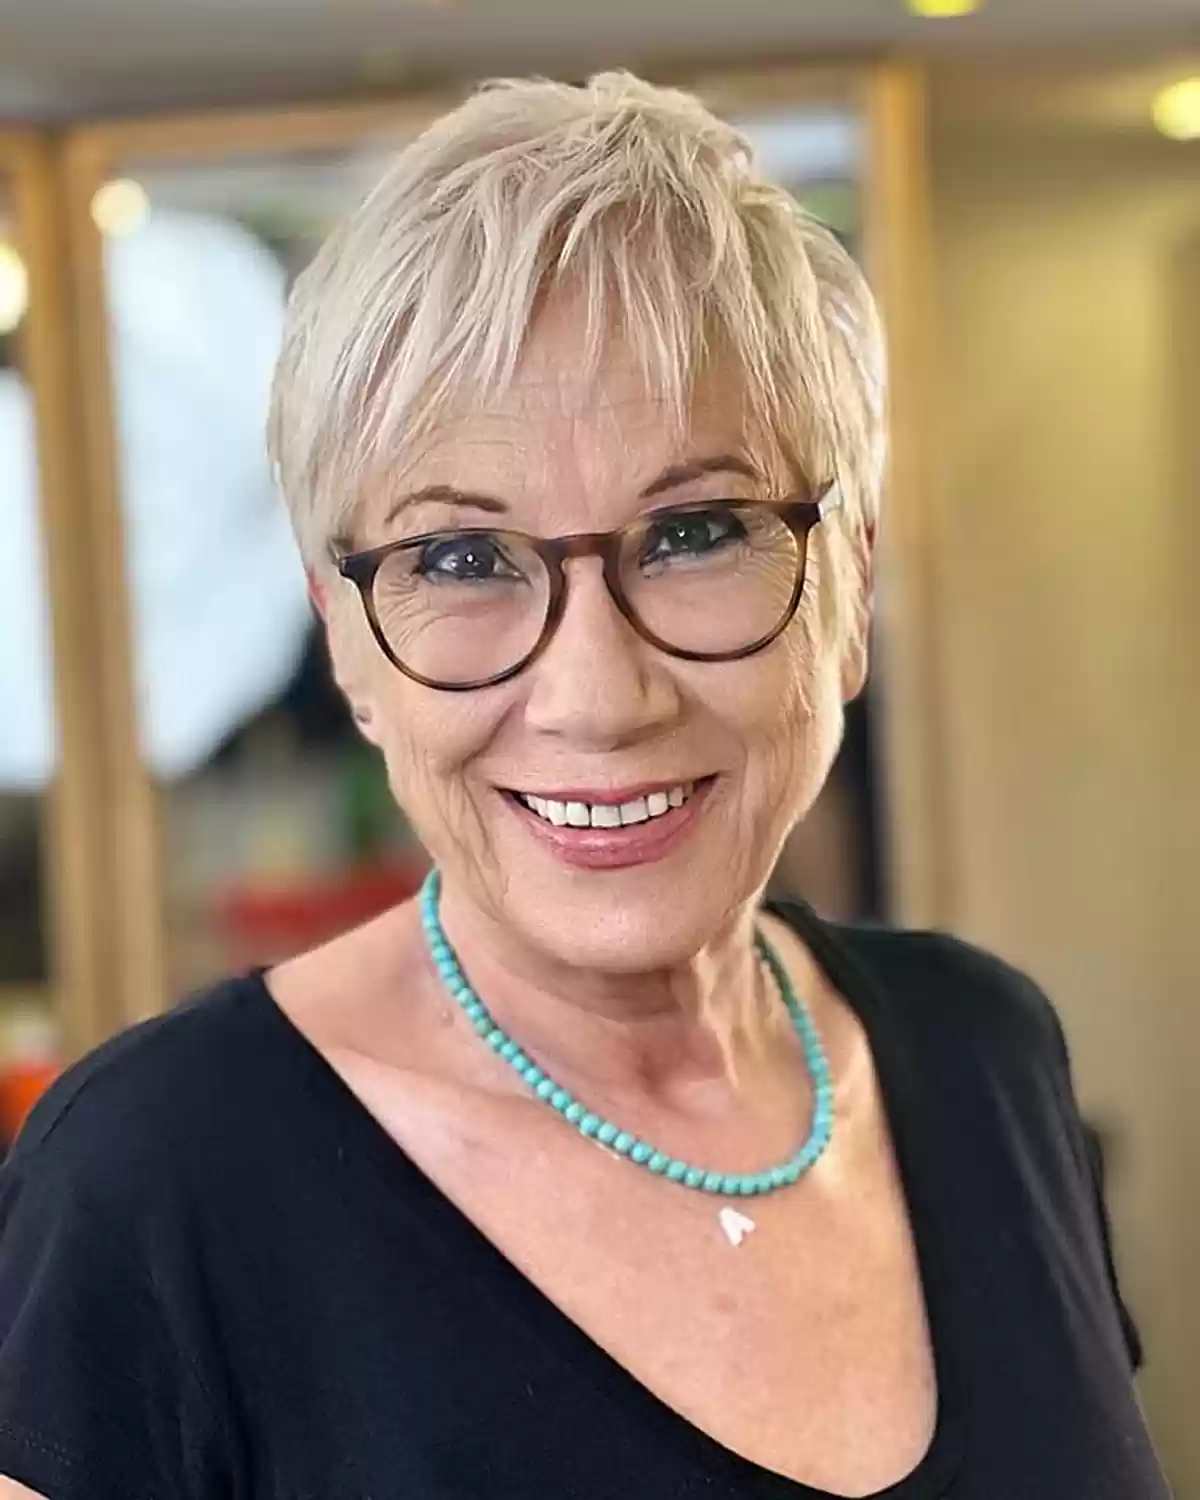 Barbie Blonde Piecey Pixie Cut for Ladies Over 60 with Specs